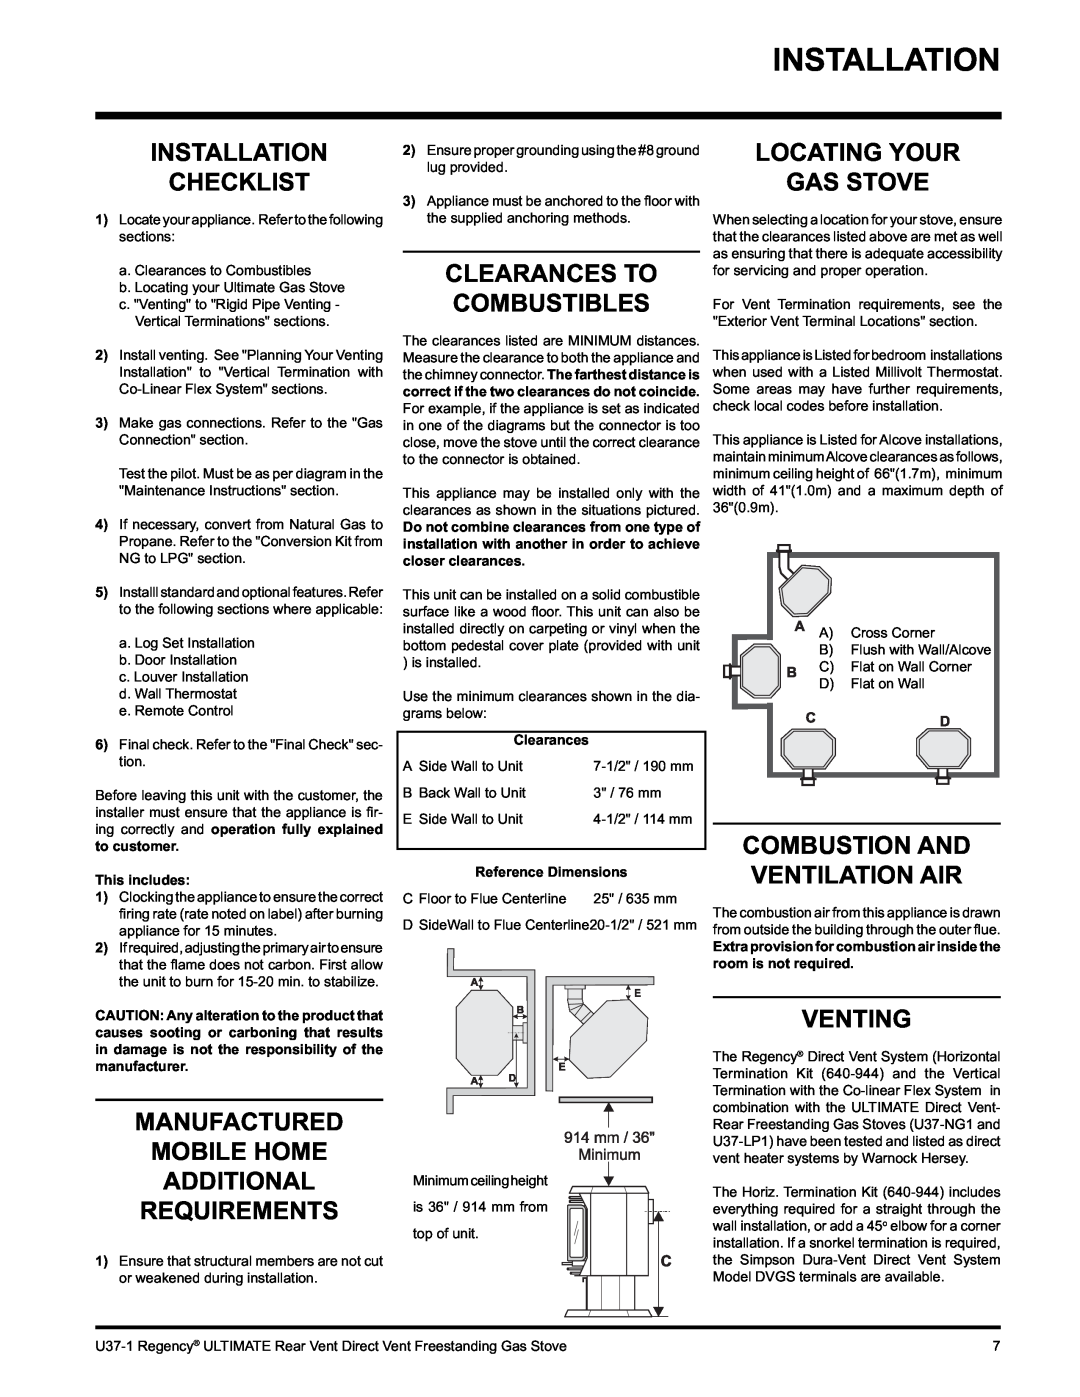 Regency U37-NG1 Installation Checklist, Manufactured Mobile Home Additional Requirements, Clearances To Combustibles 